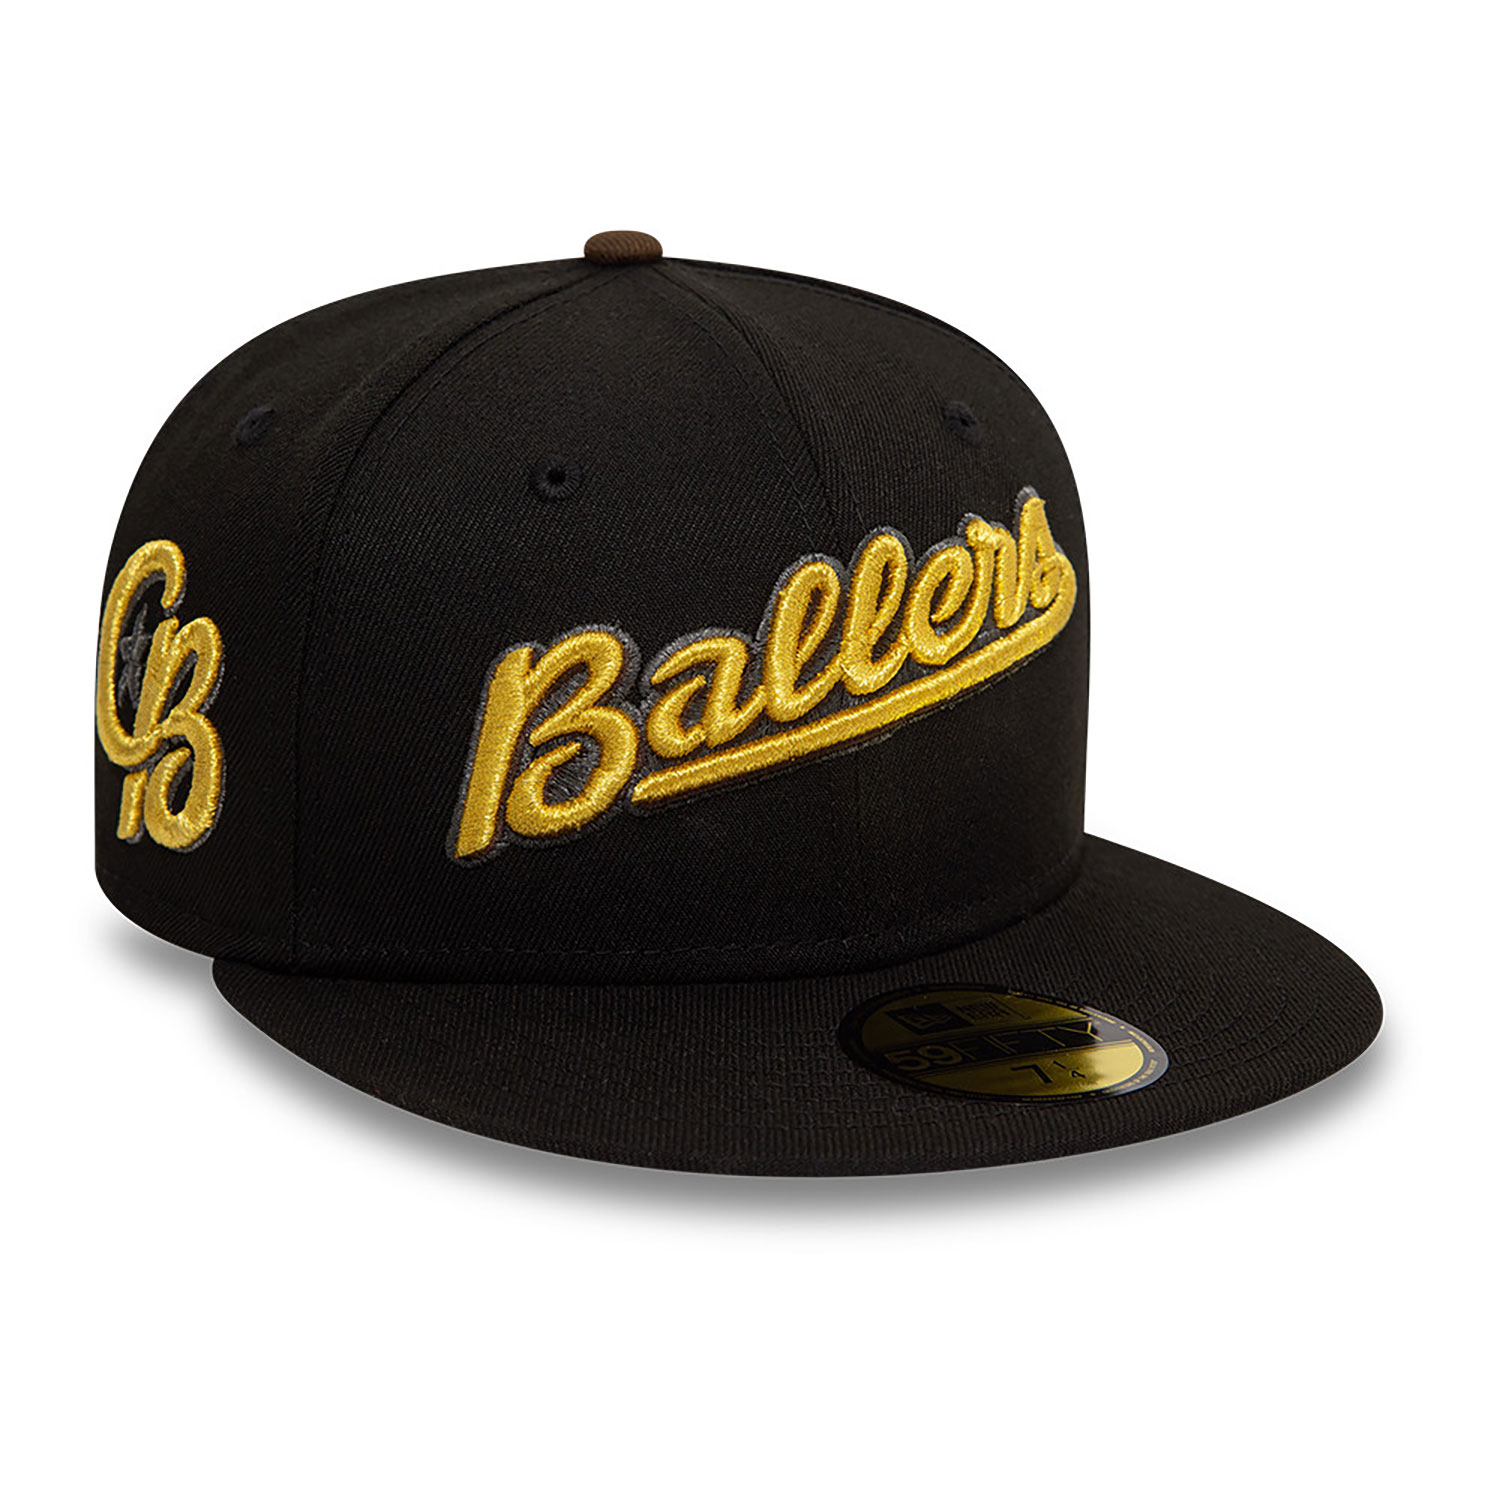 Kannapolis Cannon Ballers MiLB Ballers Black 59FIFTY Fitted Cap